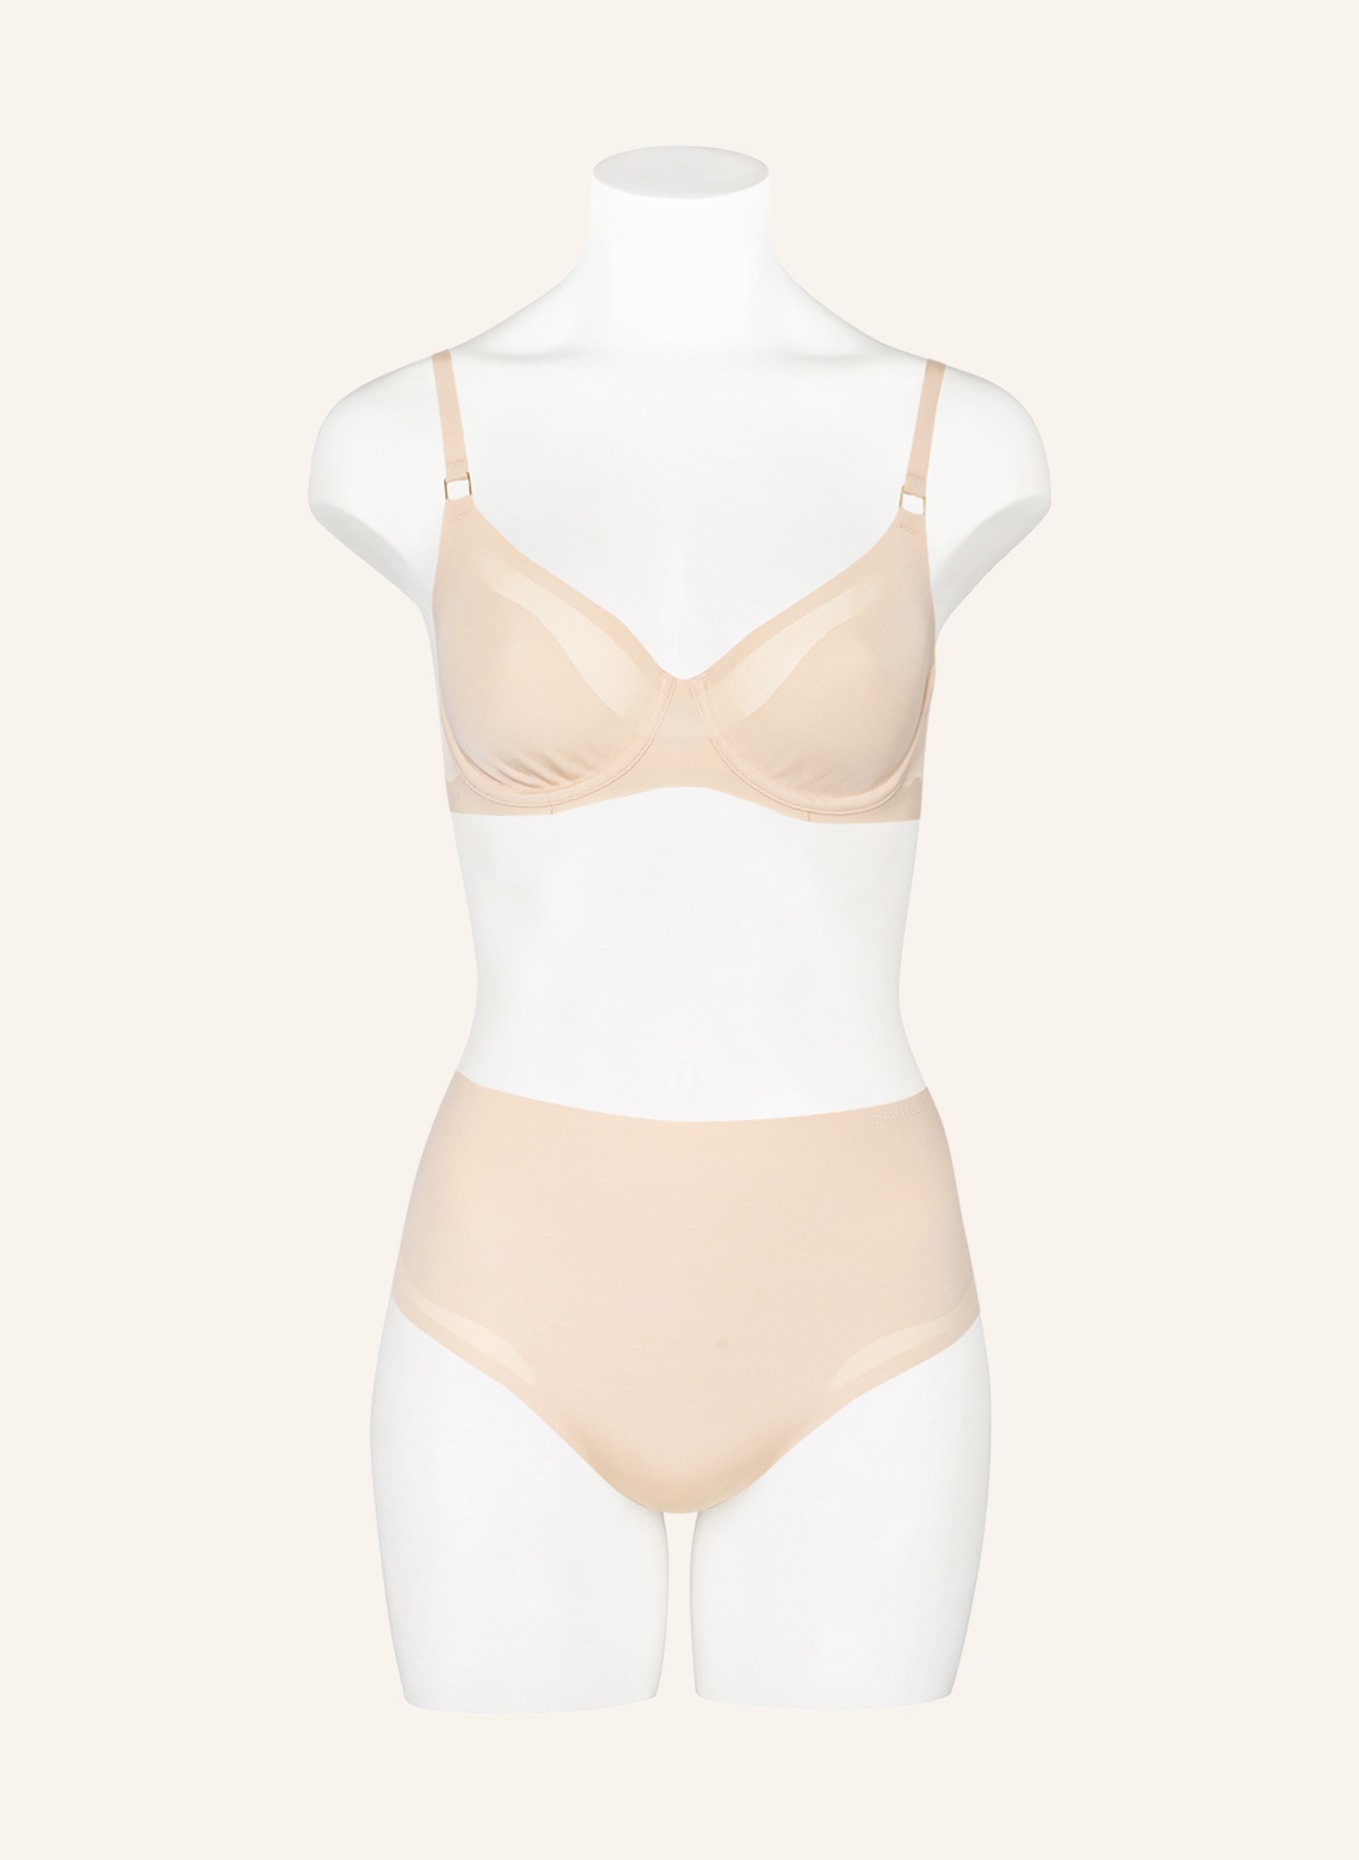 CHANTELLE Shaping briefs PURE LIGHT, Color: NUDE (Image 2)